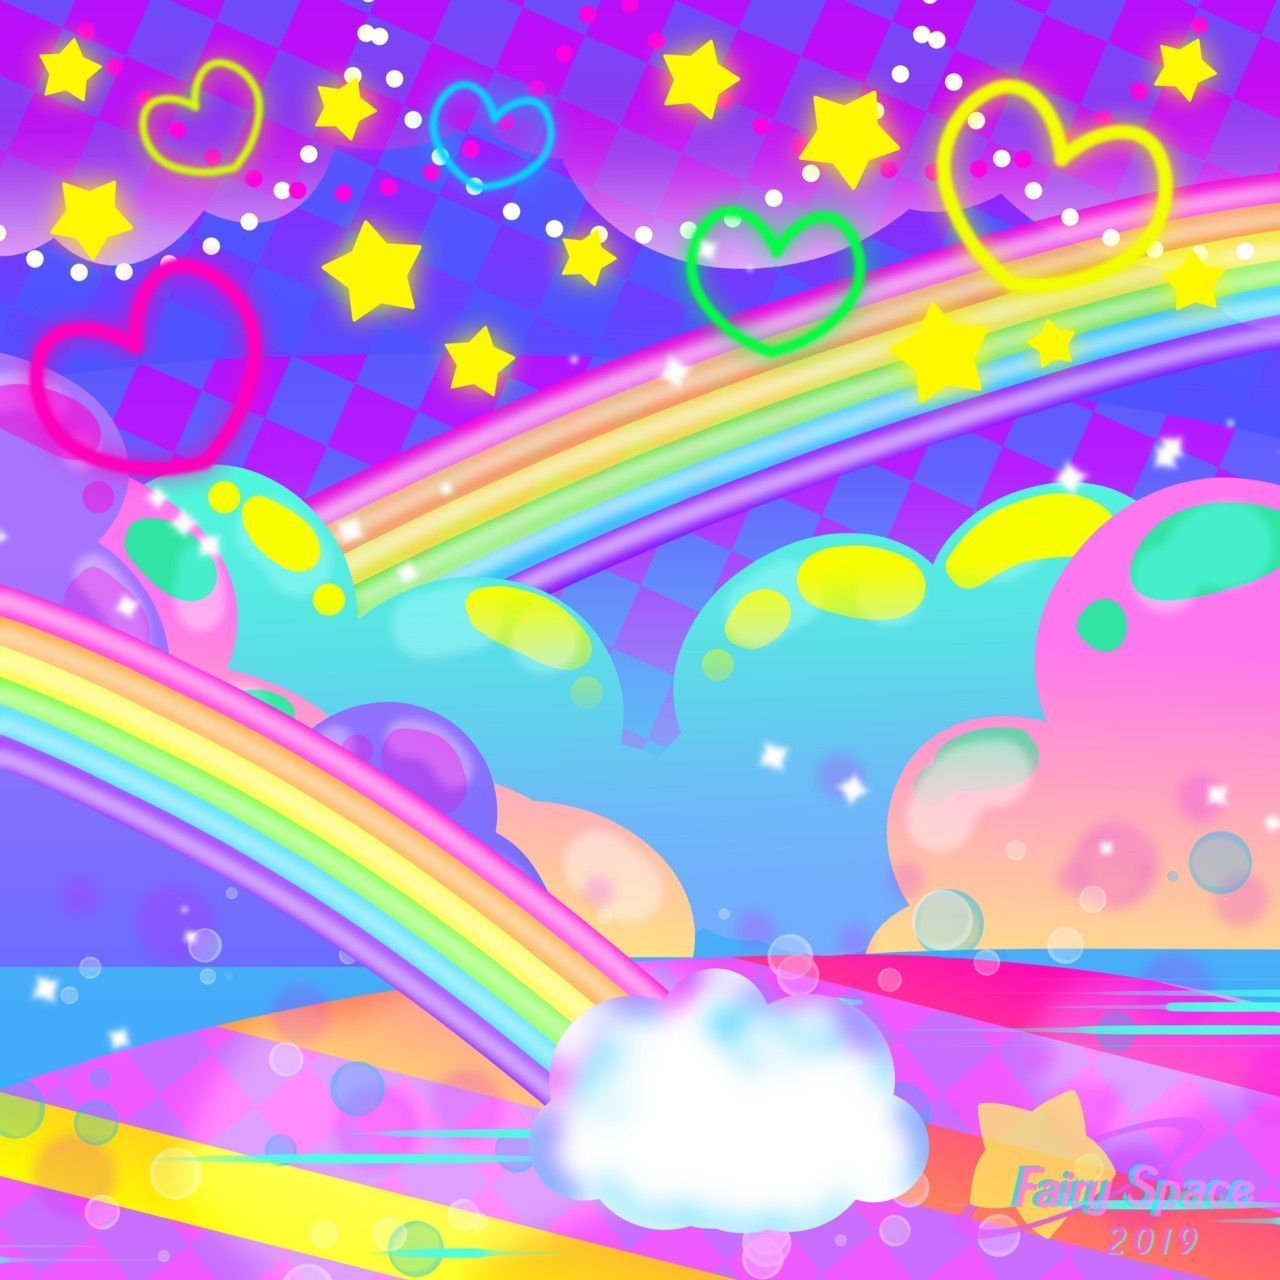 A digital drawing of a rainbow, clouds, and stars - Kidcore